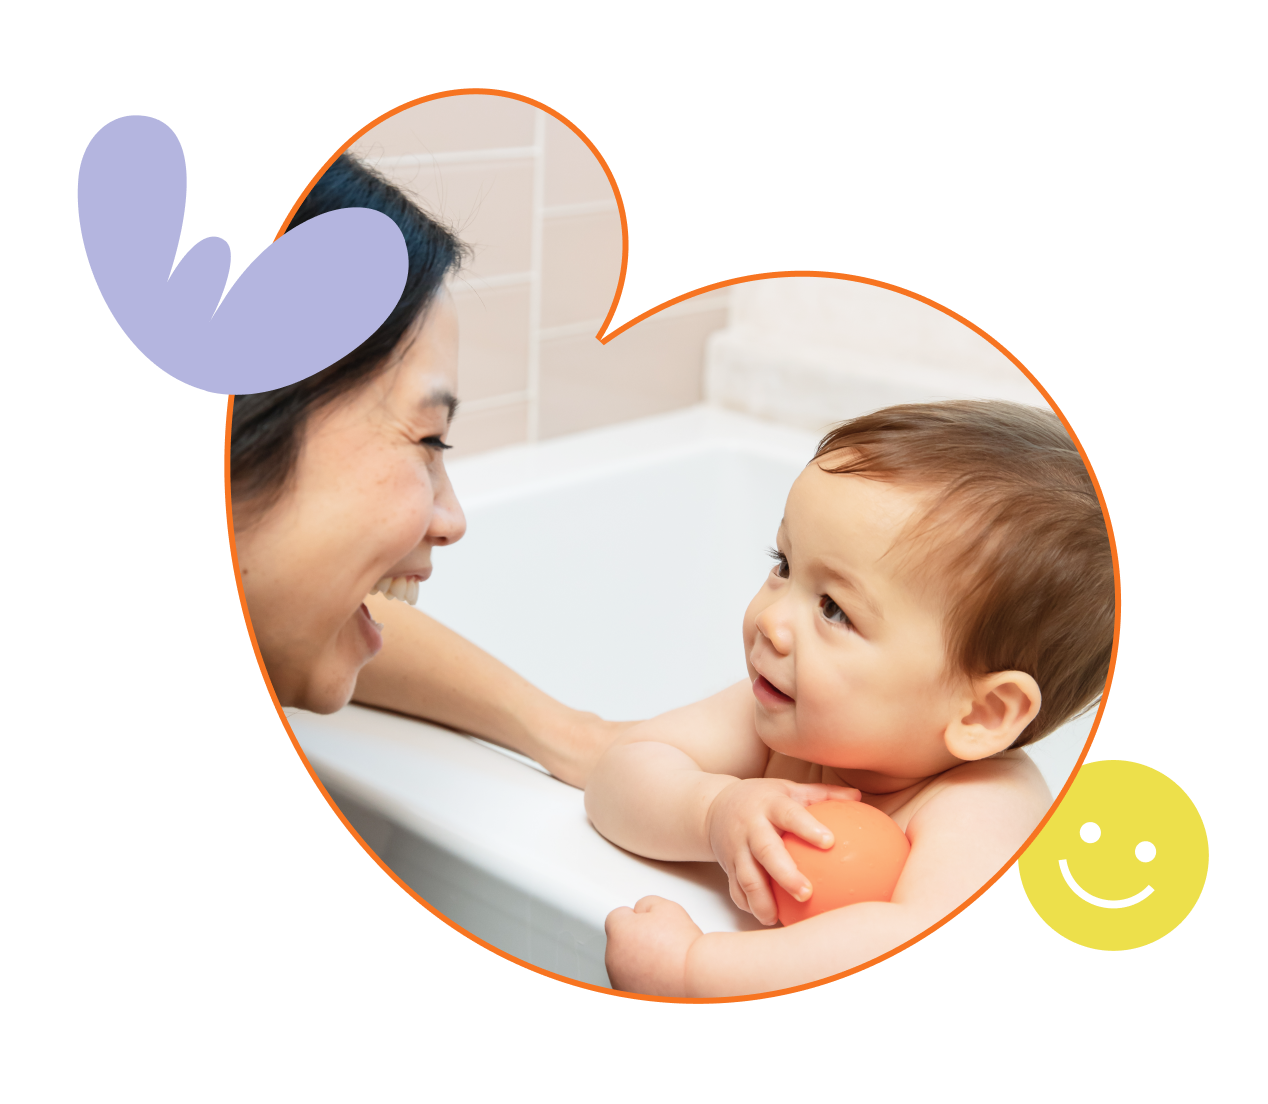 Mom is smiling at her baby boy who is holding an orange bath toy ball